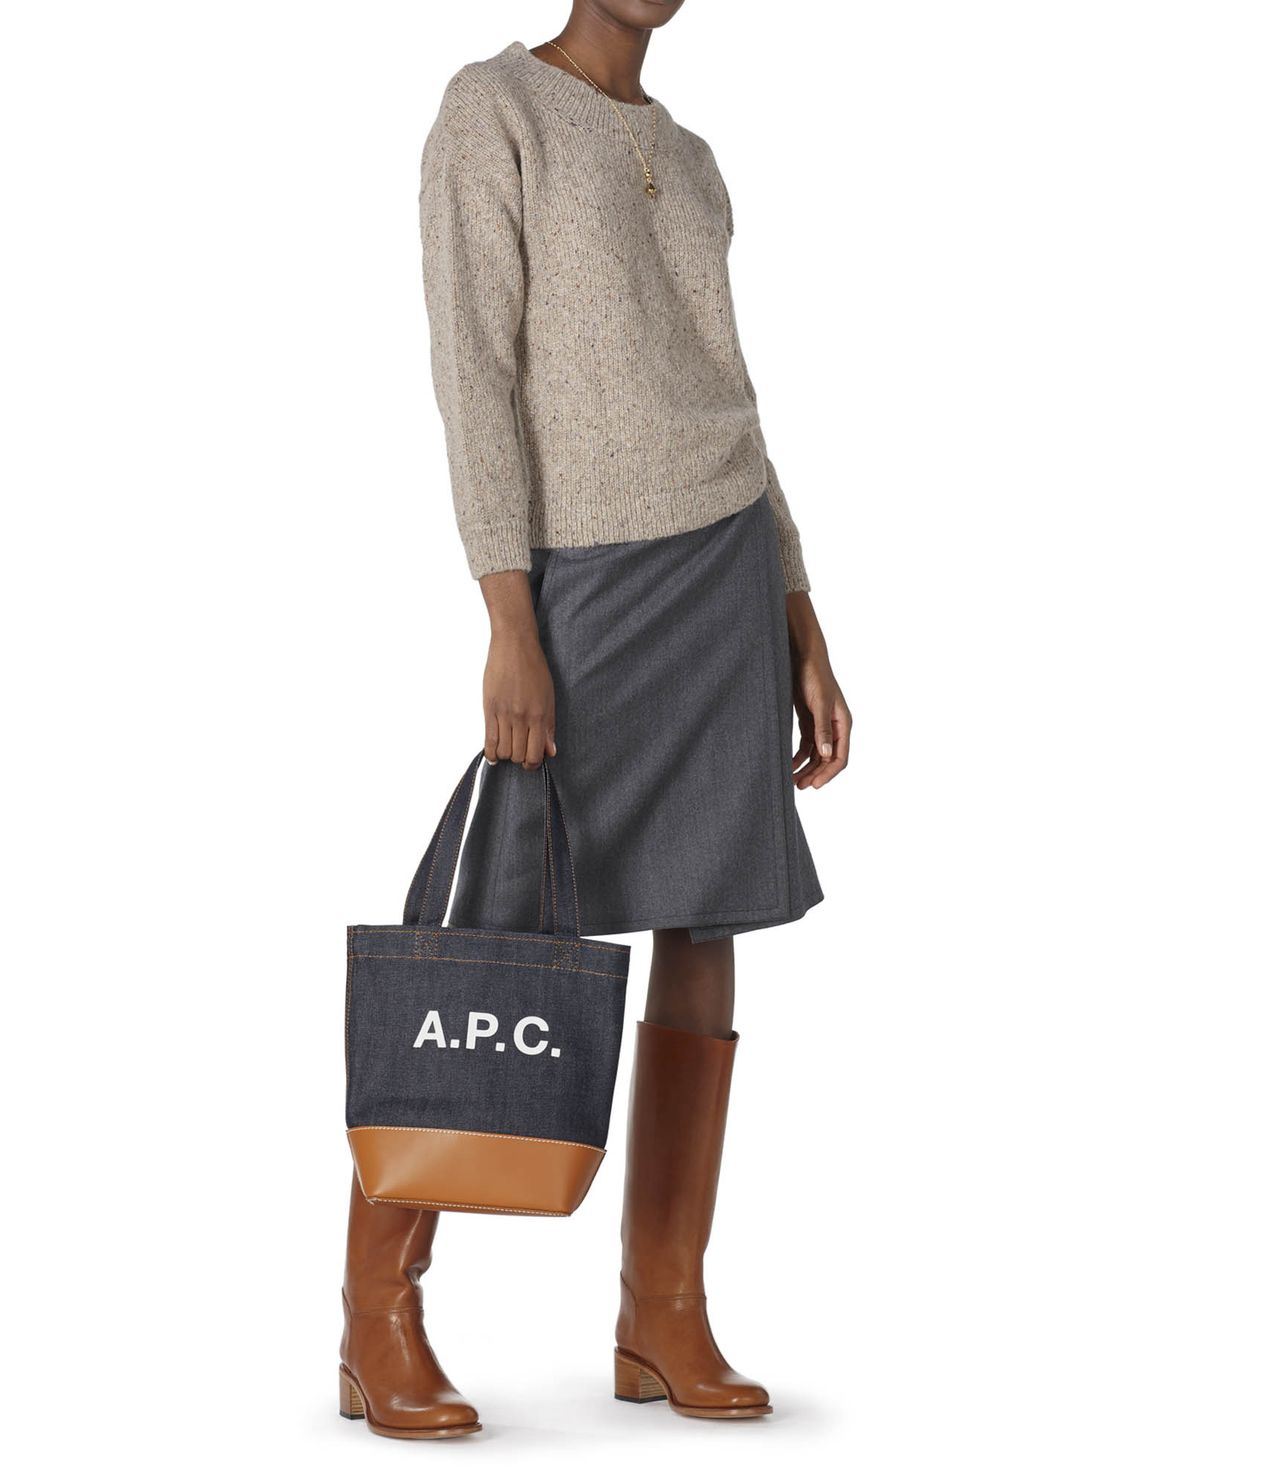 Kate sweater HELL MELIERTES BEIGE APC